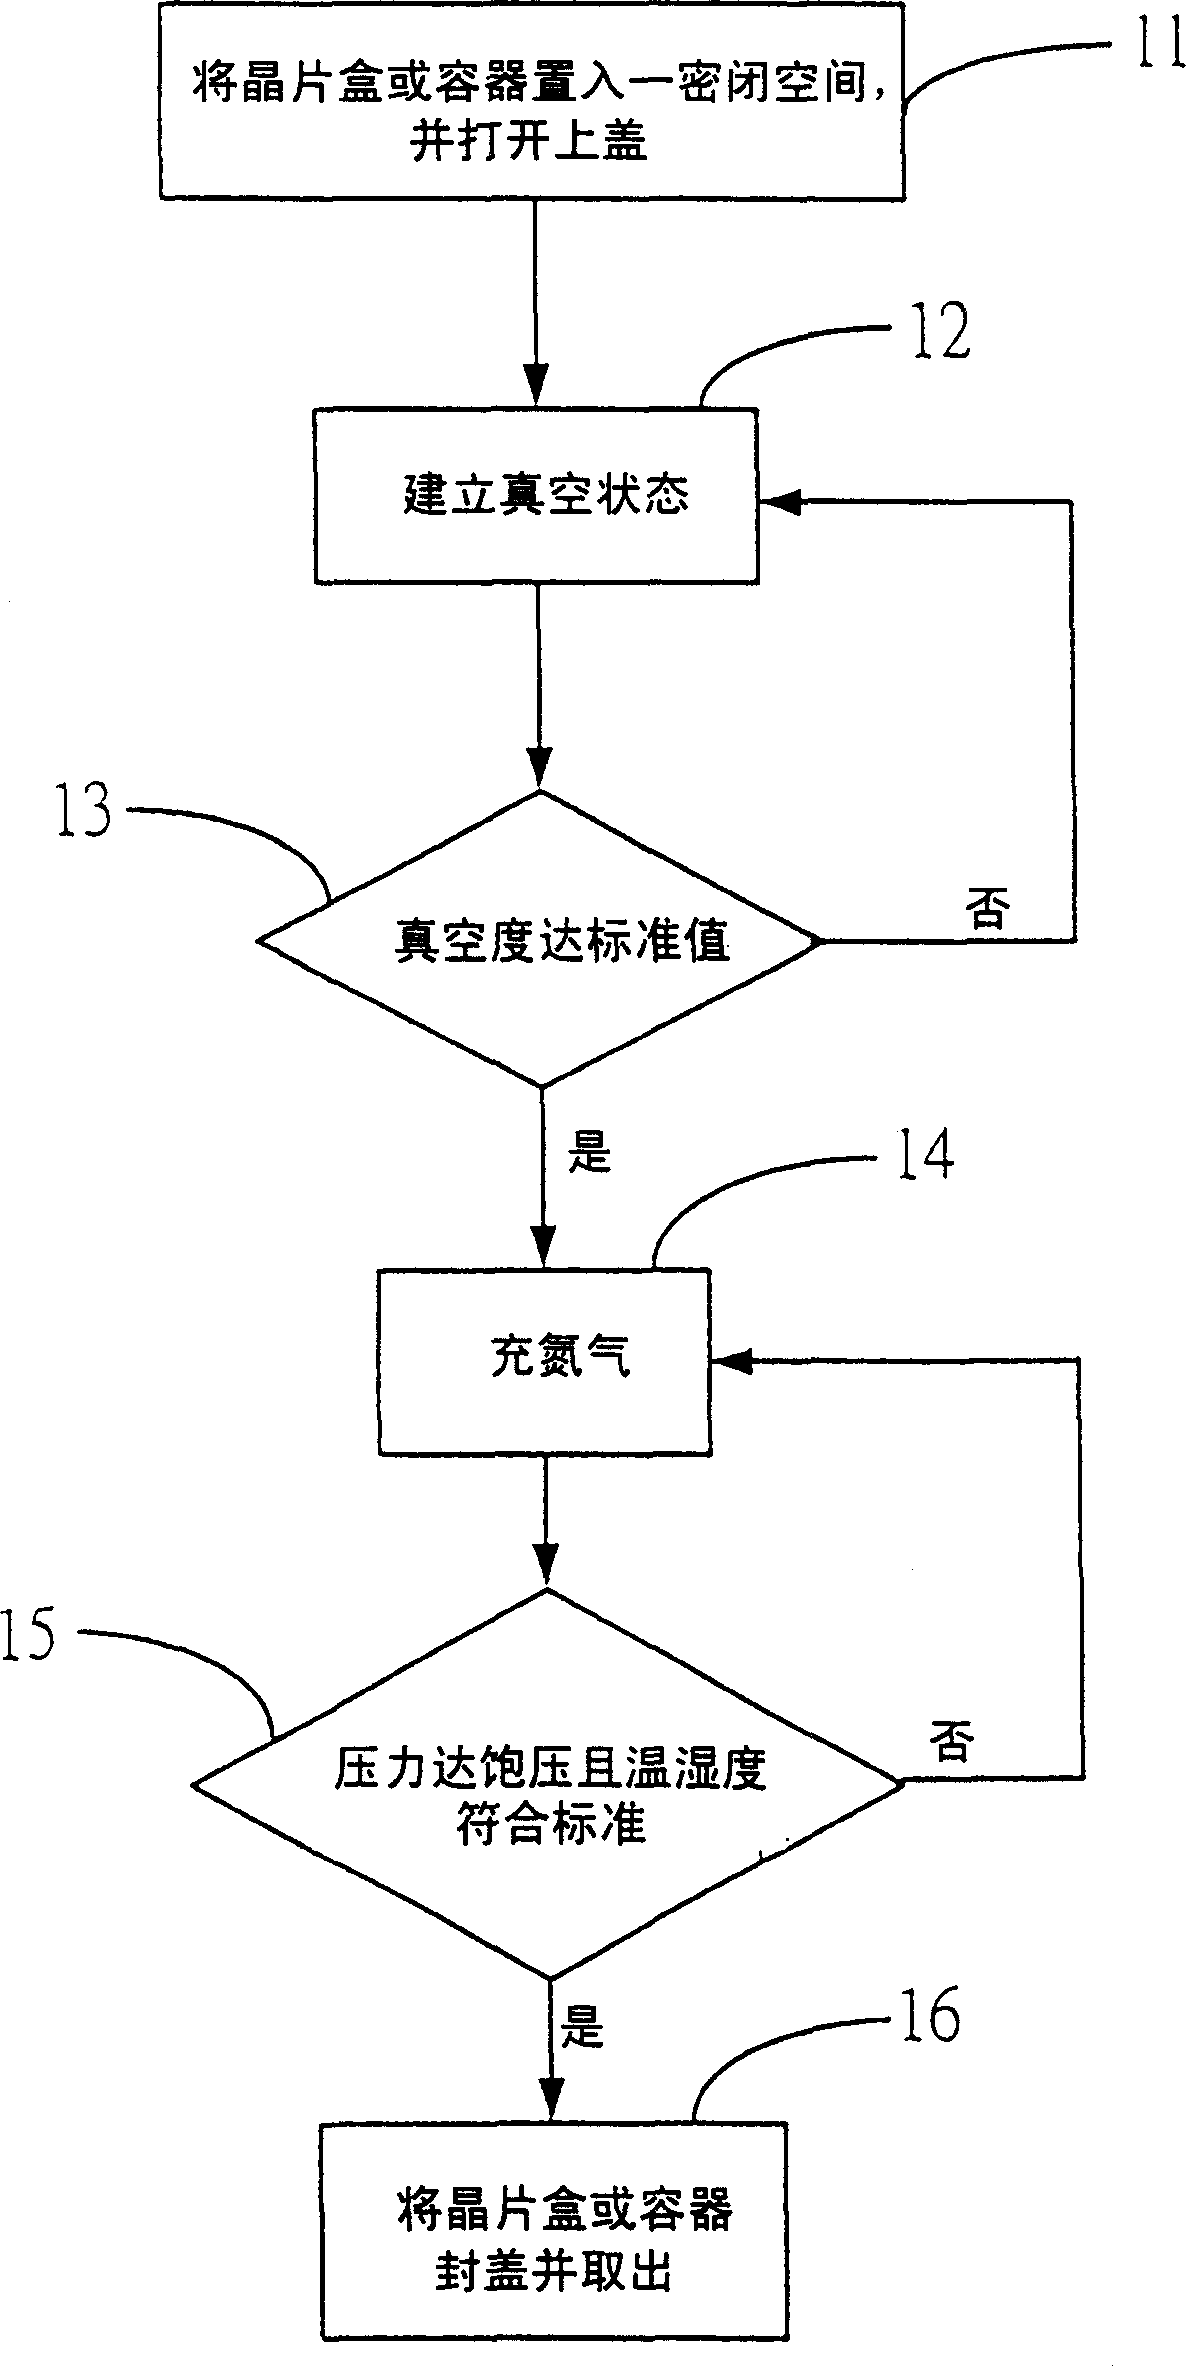 Process and apparatus for low oxygen and low moistness packing